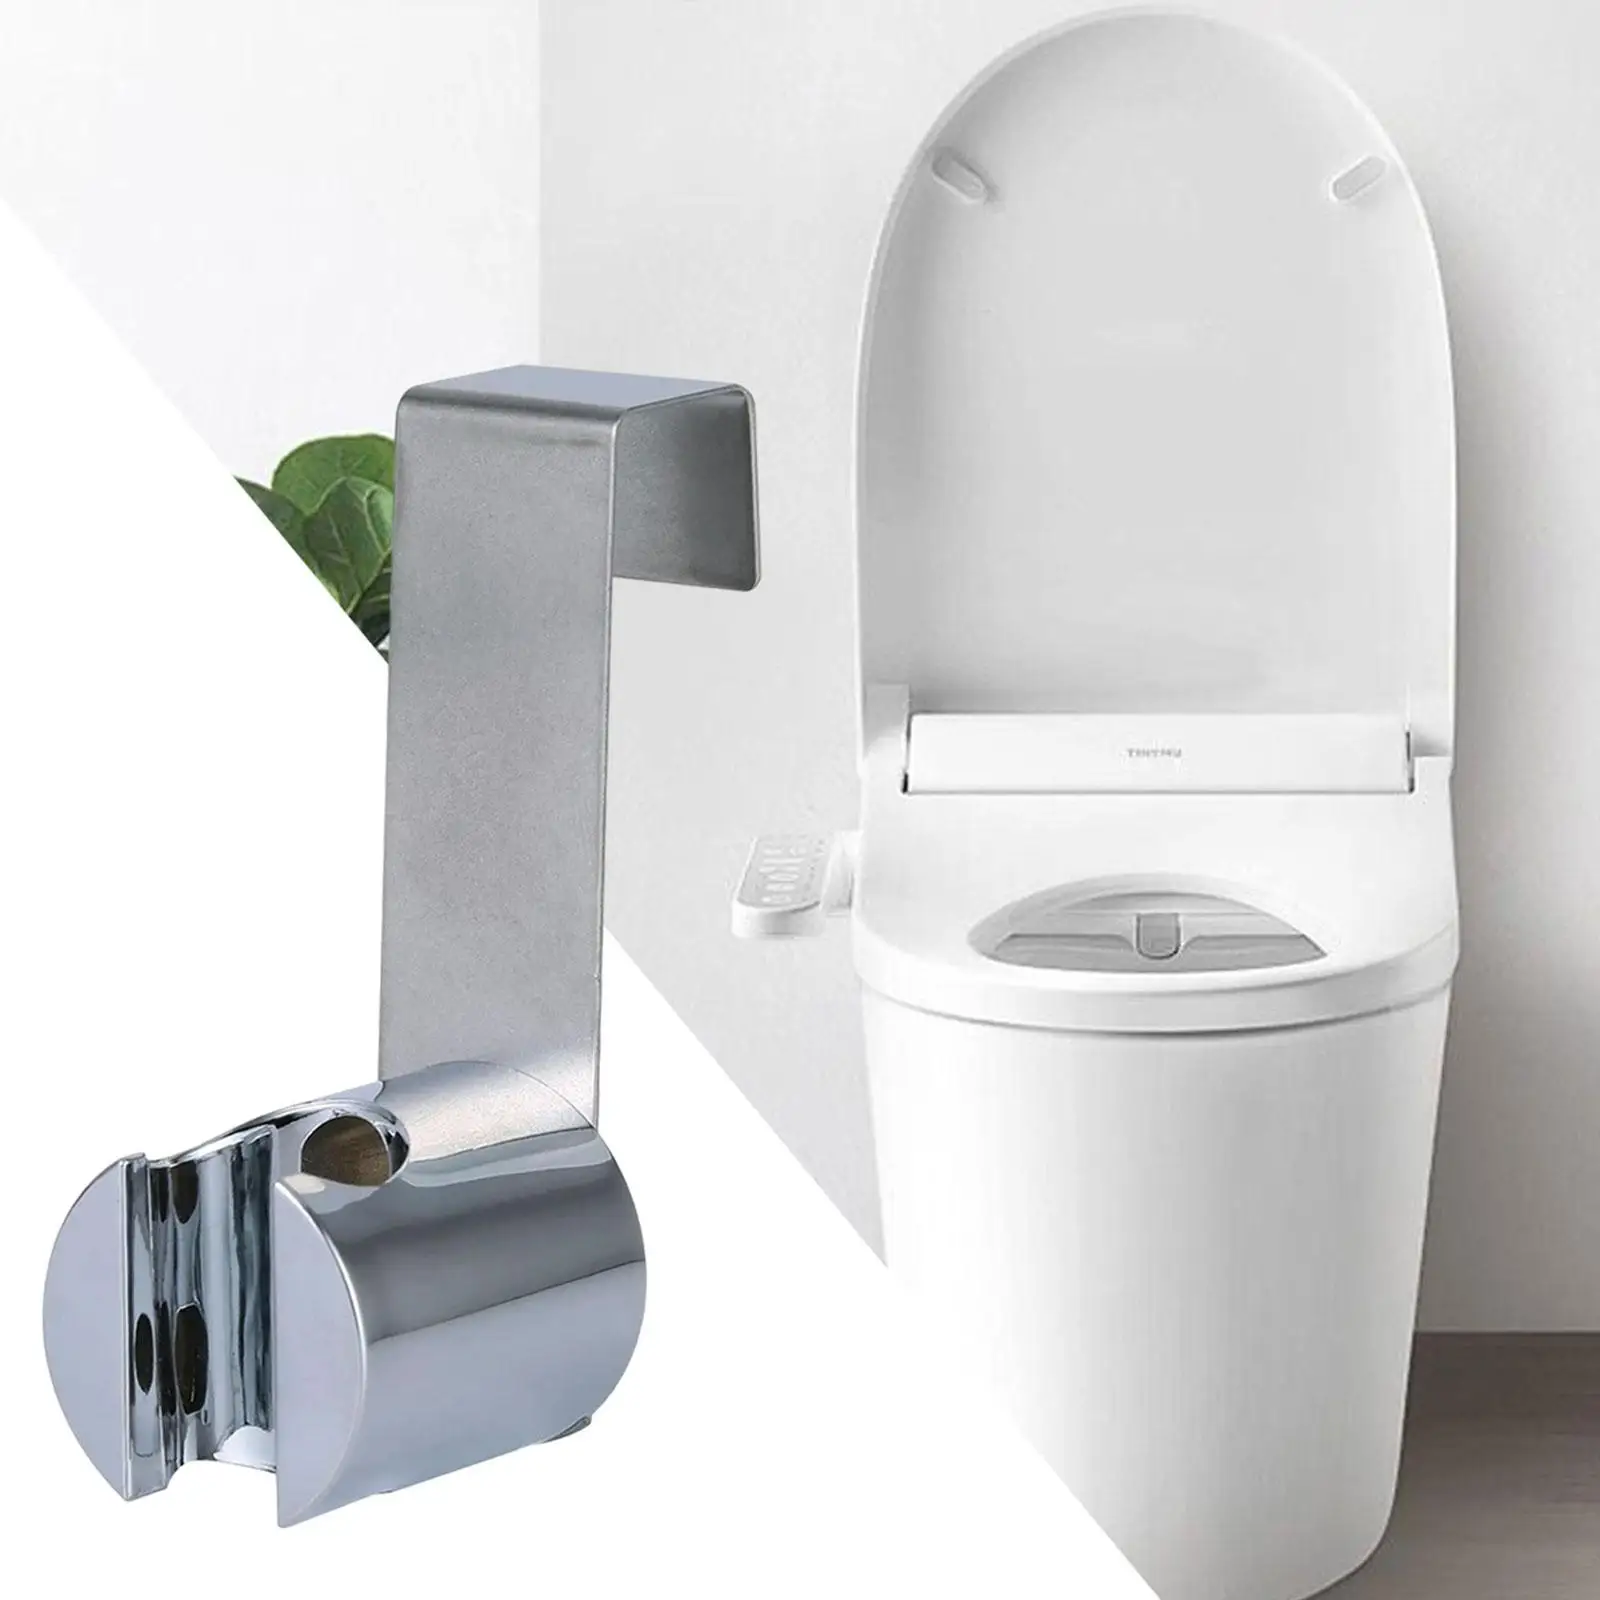 

Bidet Sprayer Holder Car Washing Stainless Steel Toilet Cleaning Baby Wash Practical Seat Bidet Attachment Easy to Install Stand